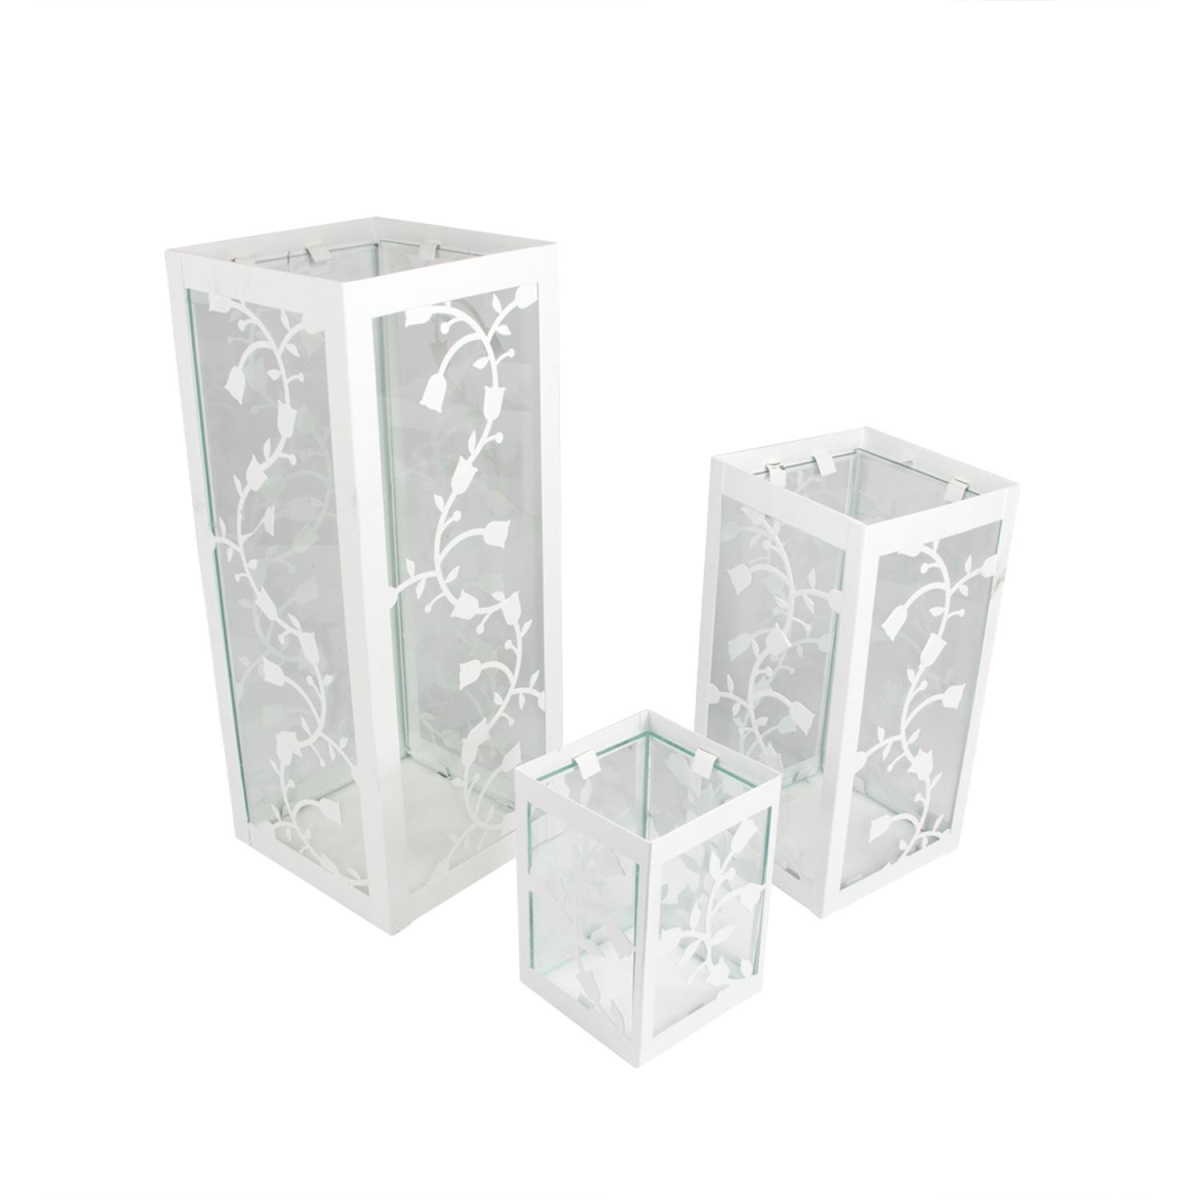 31320322 12 In. White French Country Garden Floral Pillar Candle Holder Lantern, Set Of 3